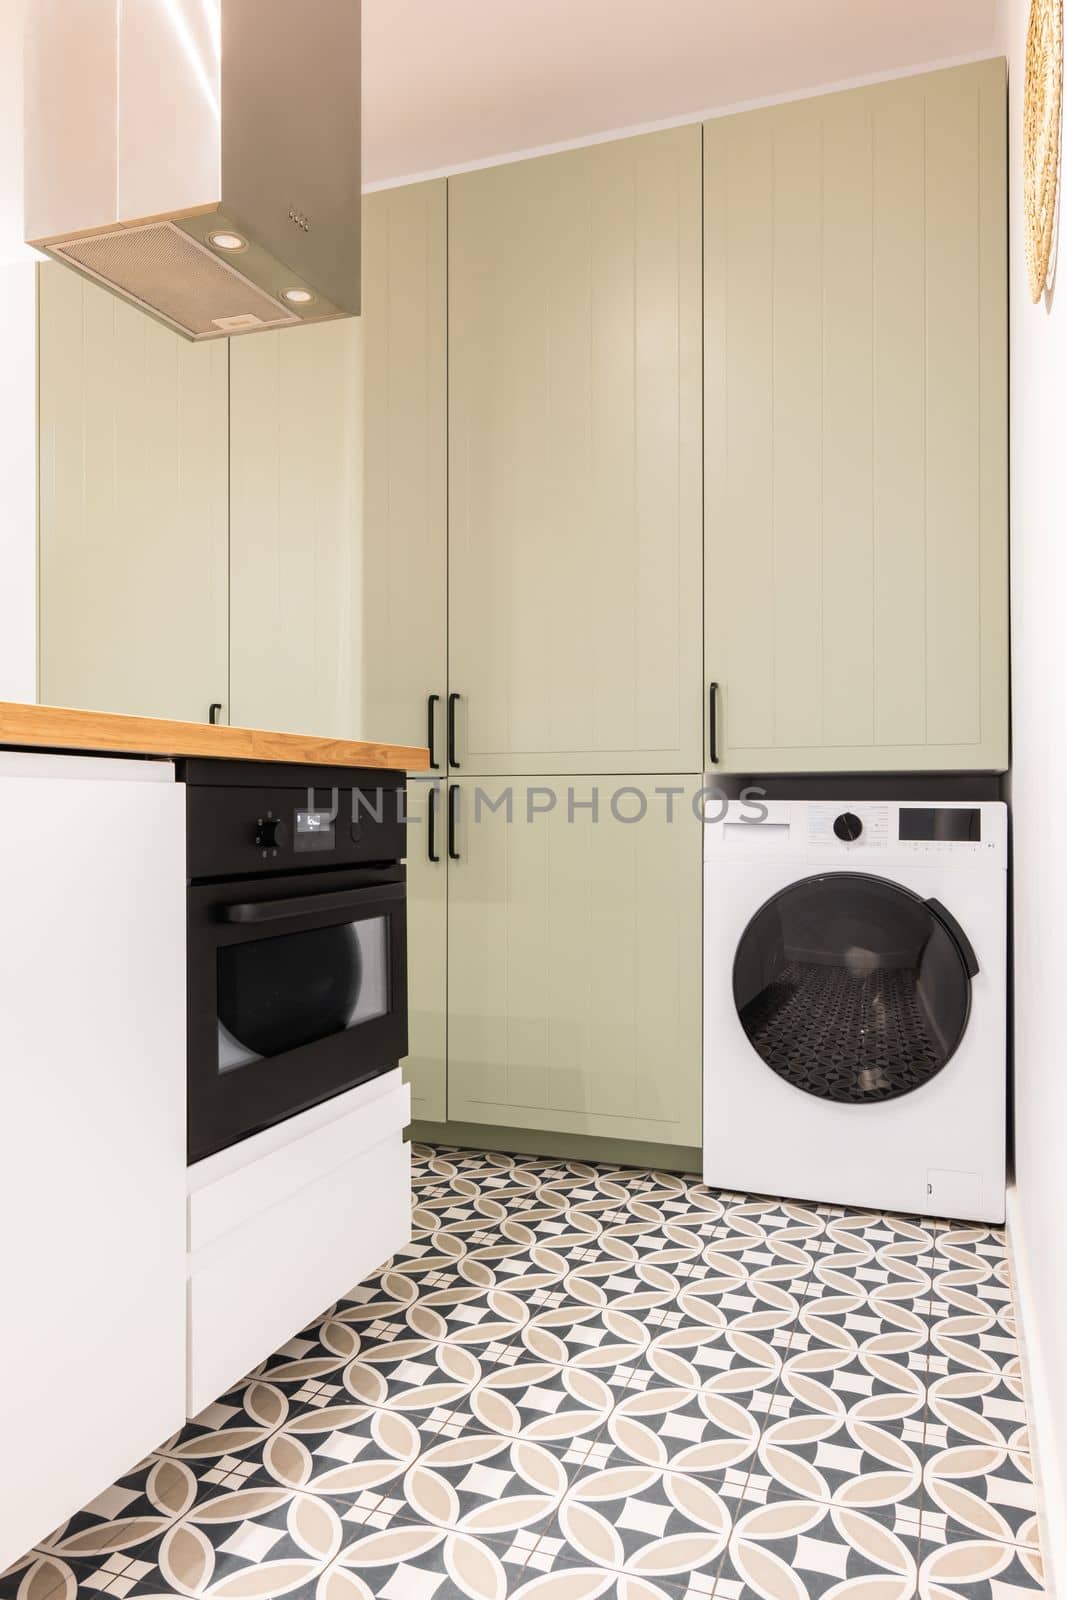 Part of spacious kitchen with modern appliances with black elements. Large built-in wooden cabinet for kitchenware and utensils in beige color with black handles. Floor is made of marble mosaic tiles. by apavlin